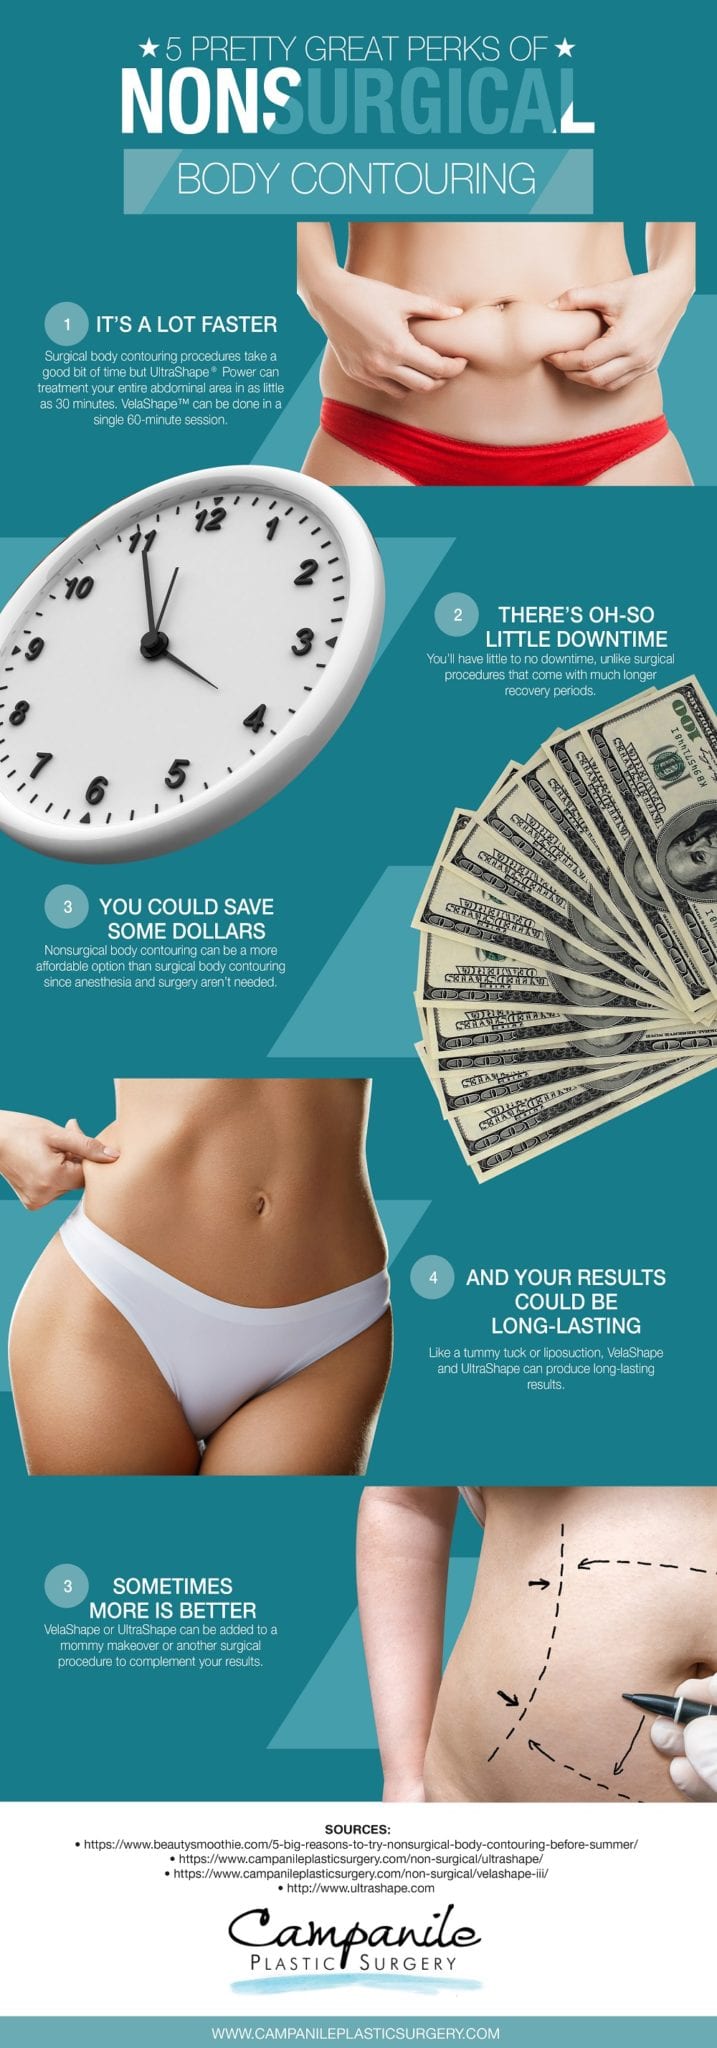 5 Pretty Great Perks of Nonsurgical Body Contouring [Infographic]